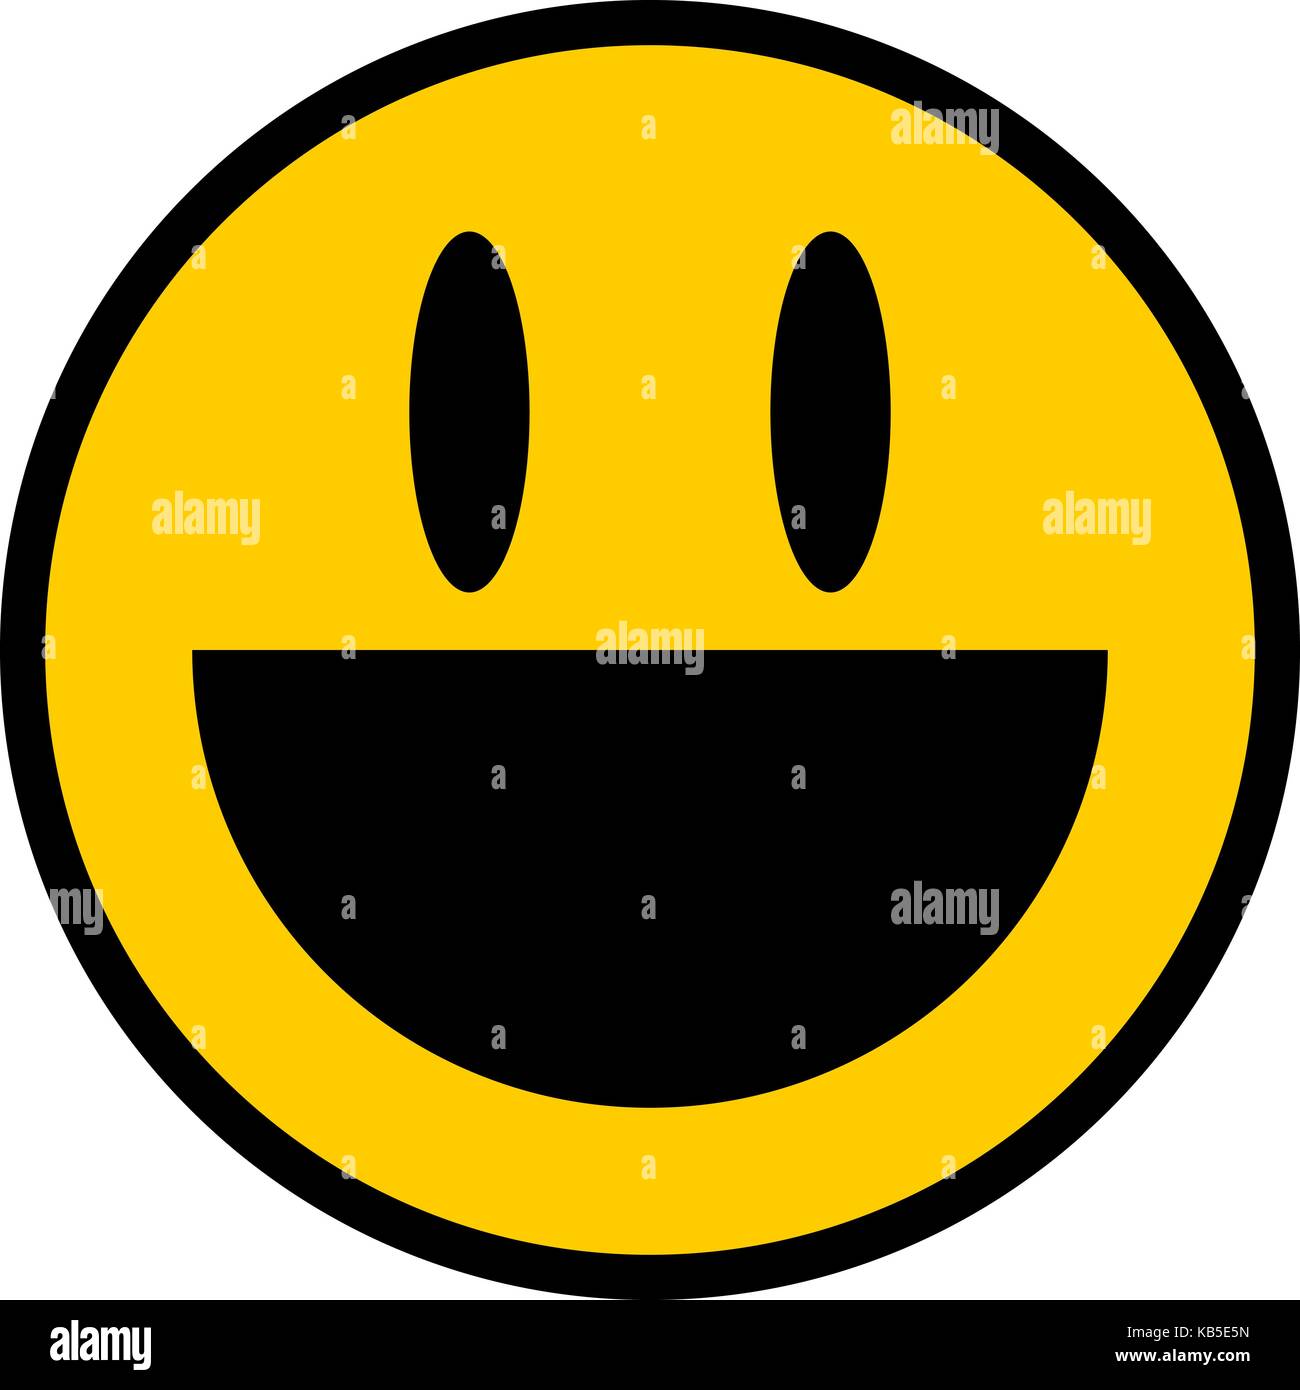 Use it in all your designs. Smiley happy smiling face emoticon icon in flat style. Quick and easy recolorable vector illustration graphic Stock Vector